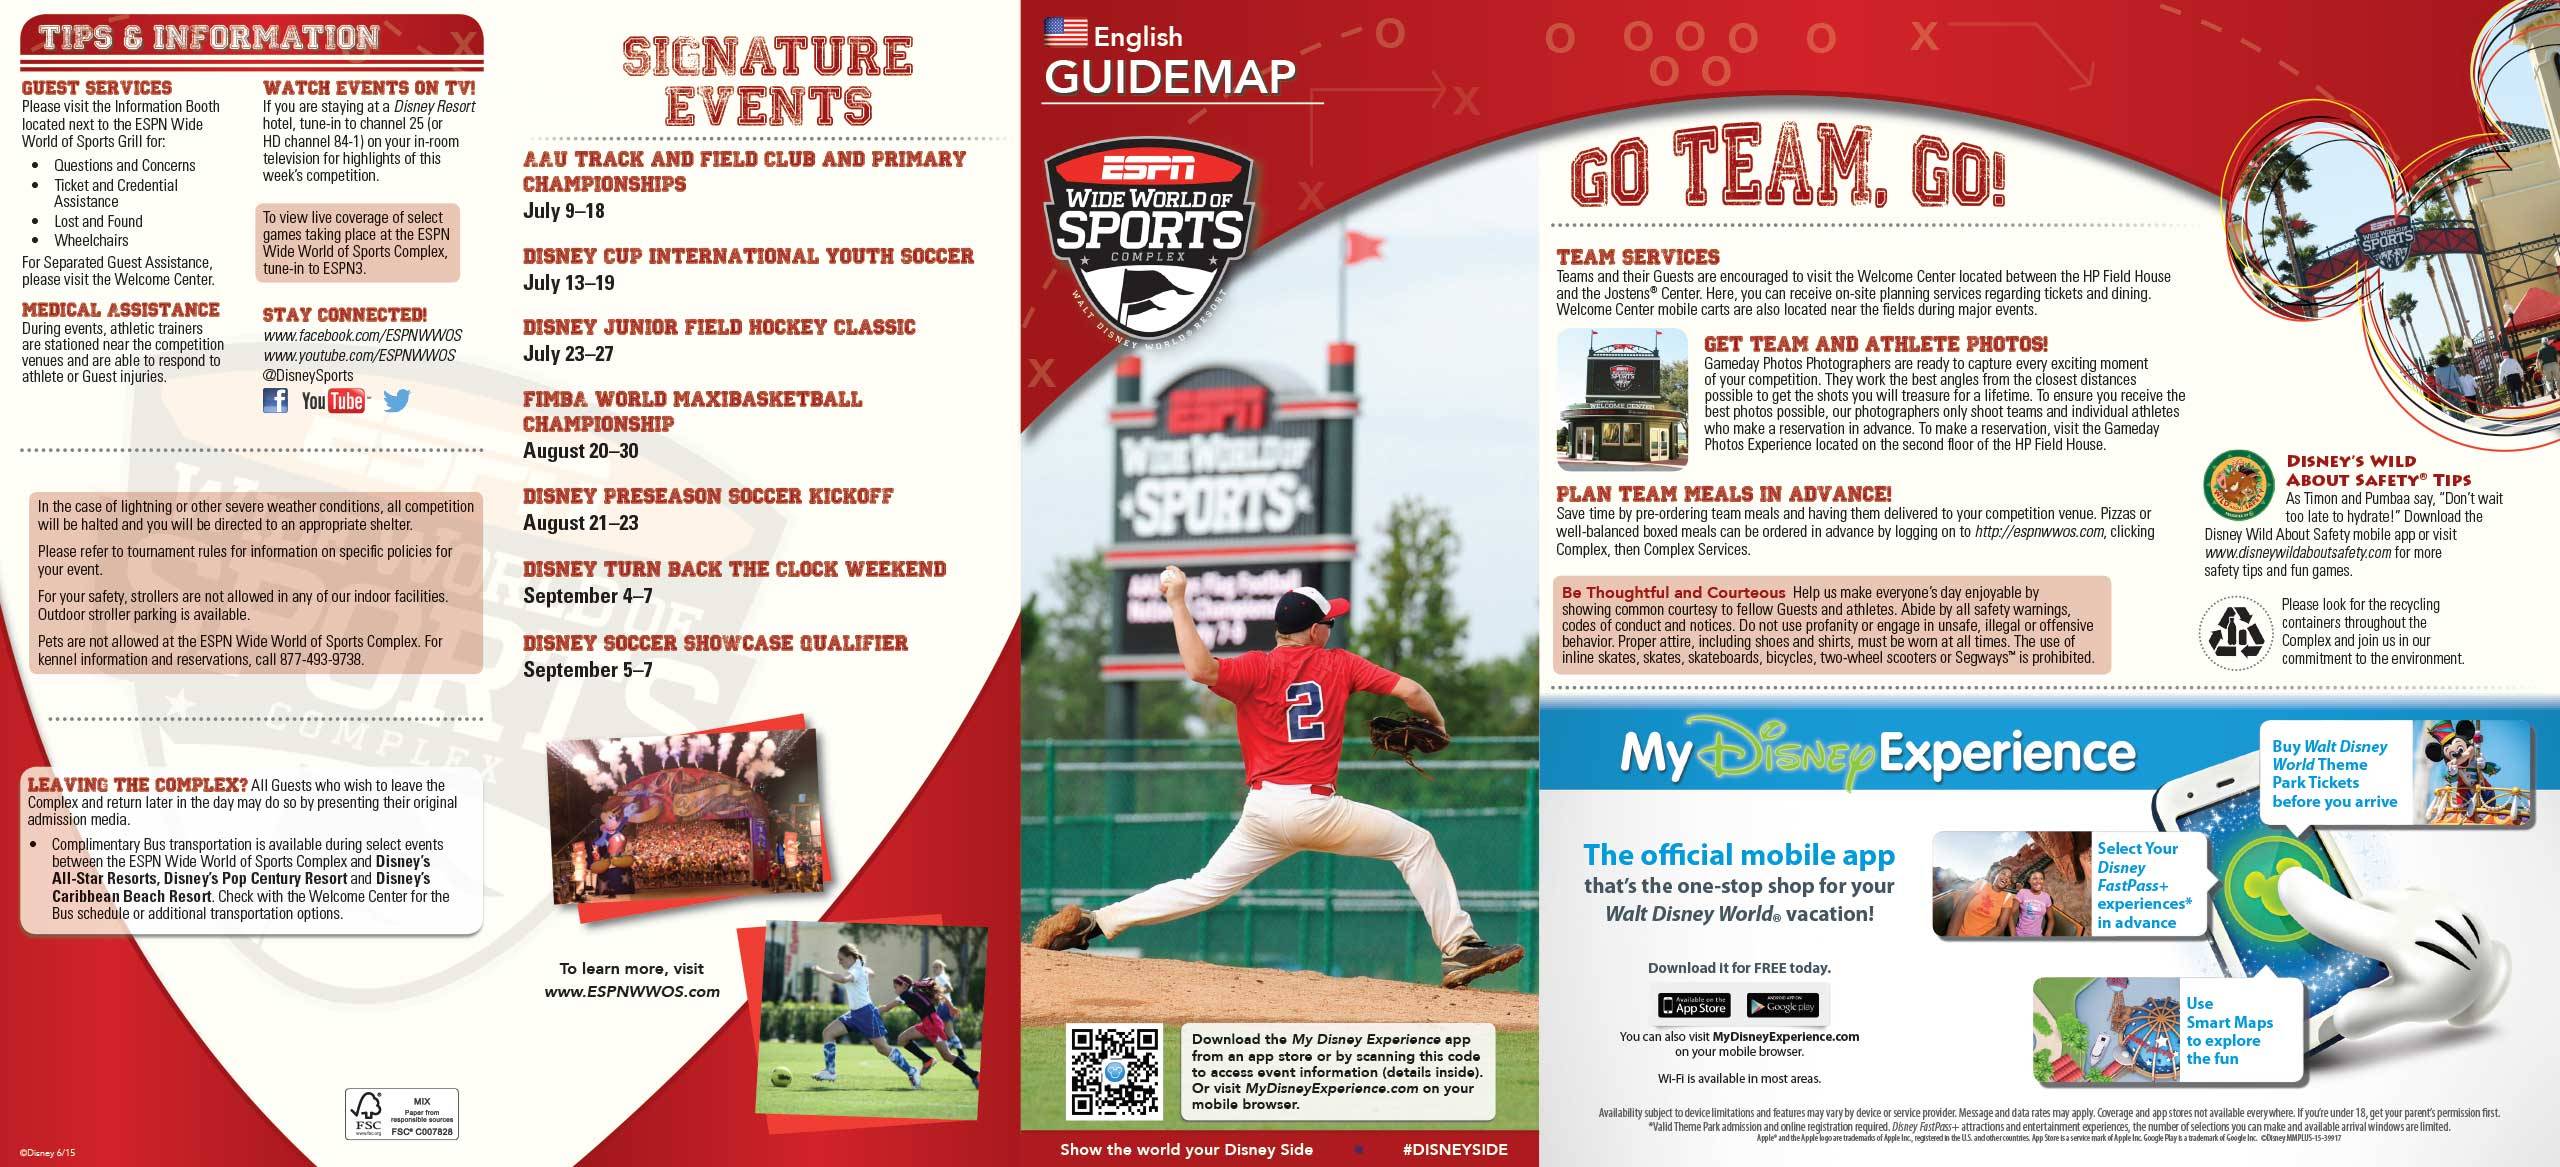 ESPN World of Sports Guide Map May 2015 - Front